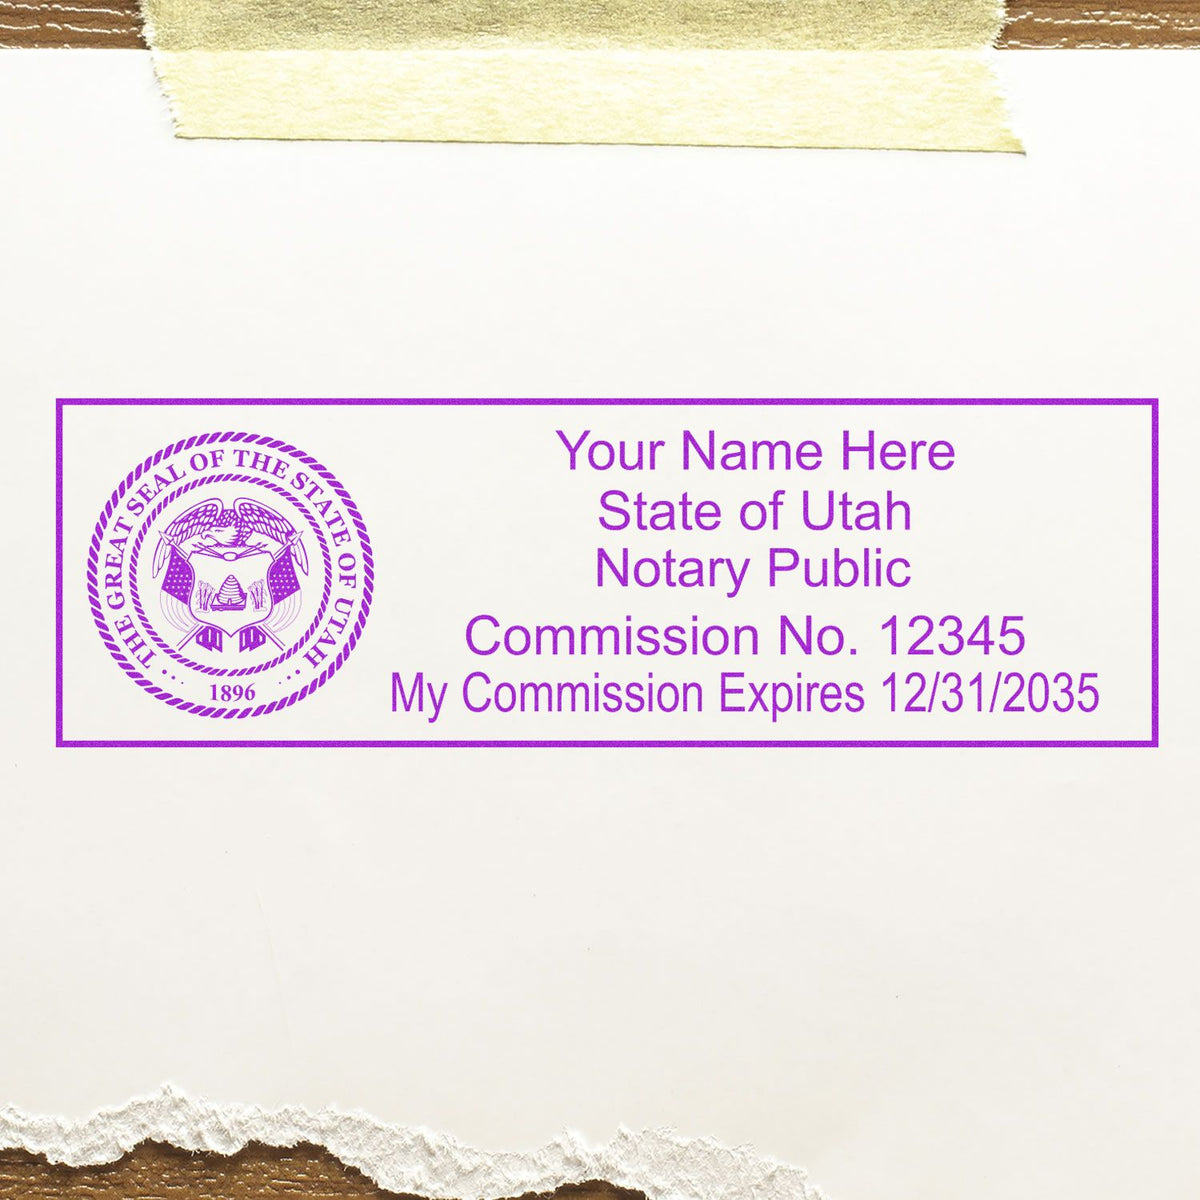 An alternative view of the Slim Pre-Inked State Seal Notary Stamp for Utah stamped on a sheet of paper showing the image in use